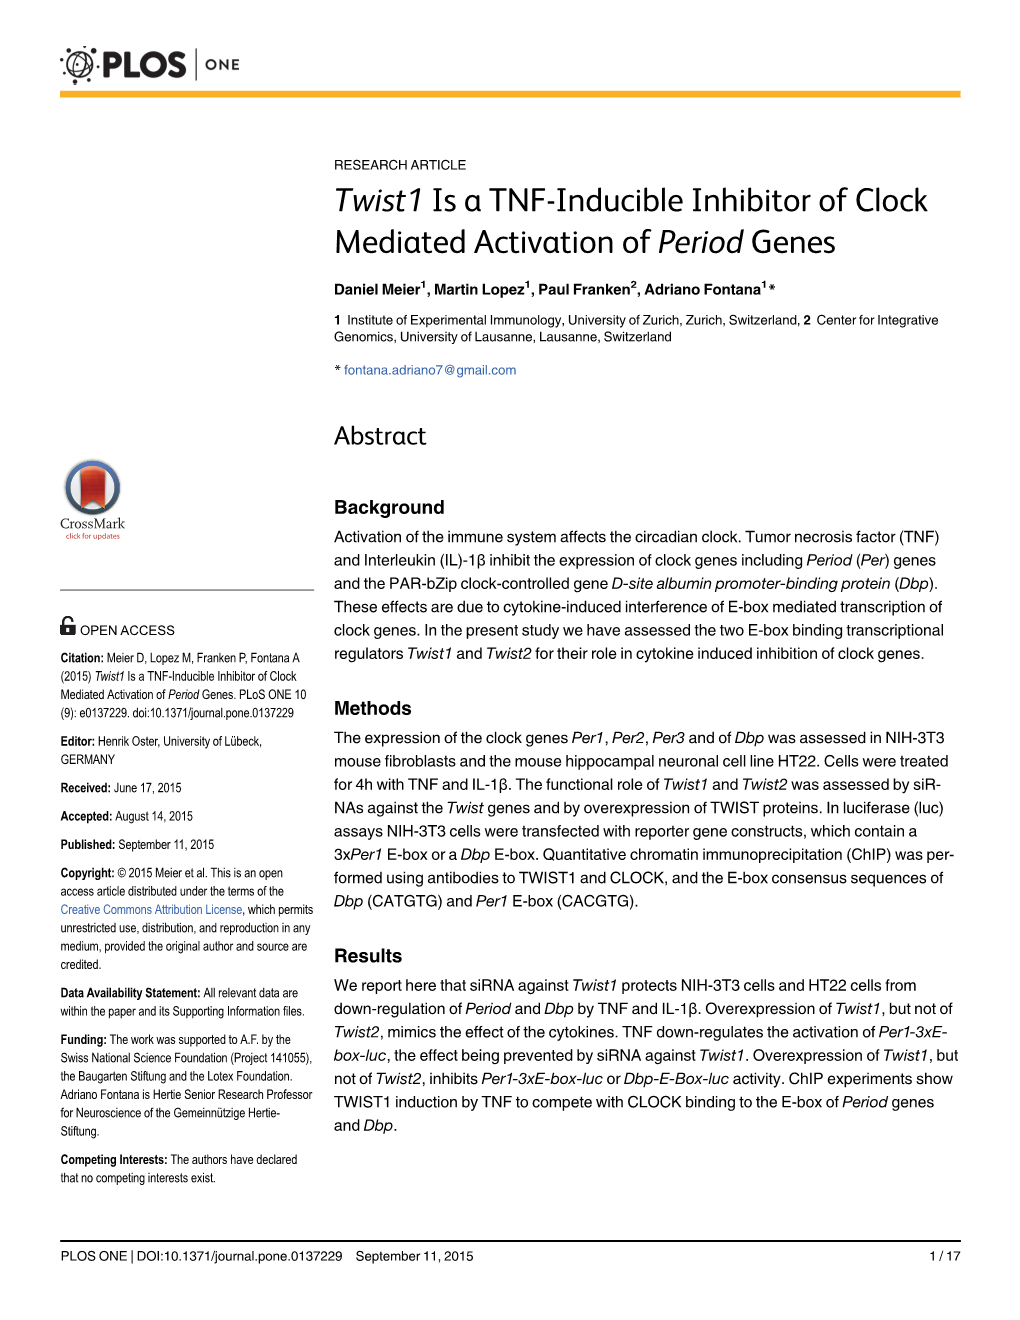 Twist1 Is a TNF-Inducible Inhibitor of Clock Mediated Activation of Period Genes